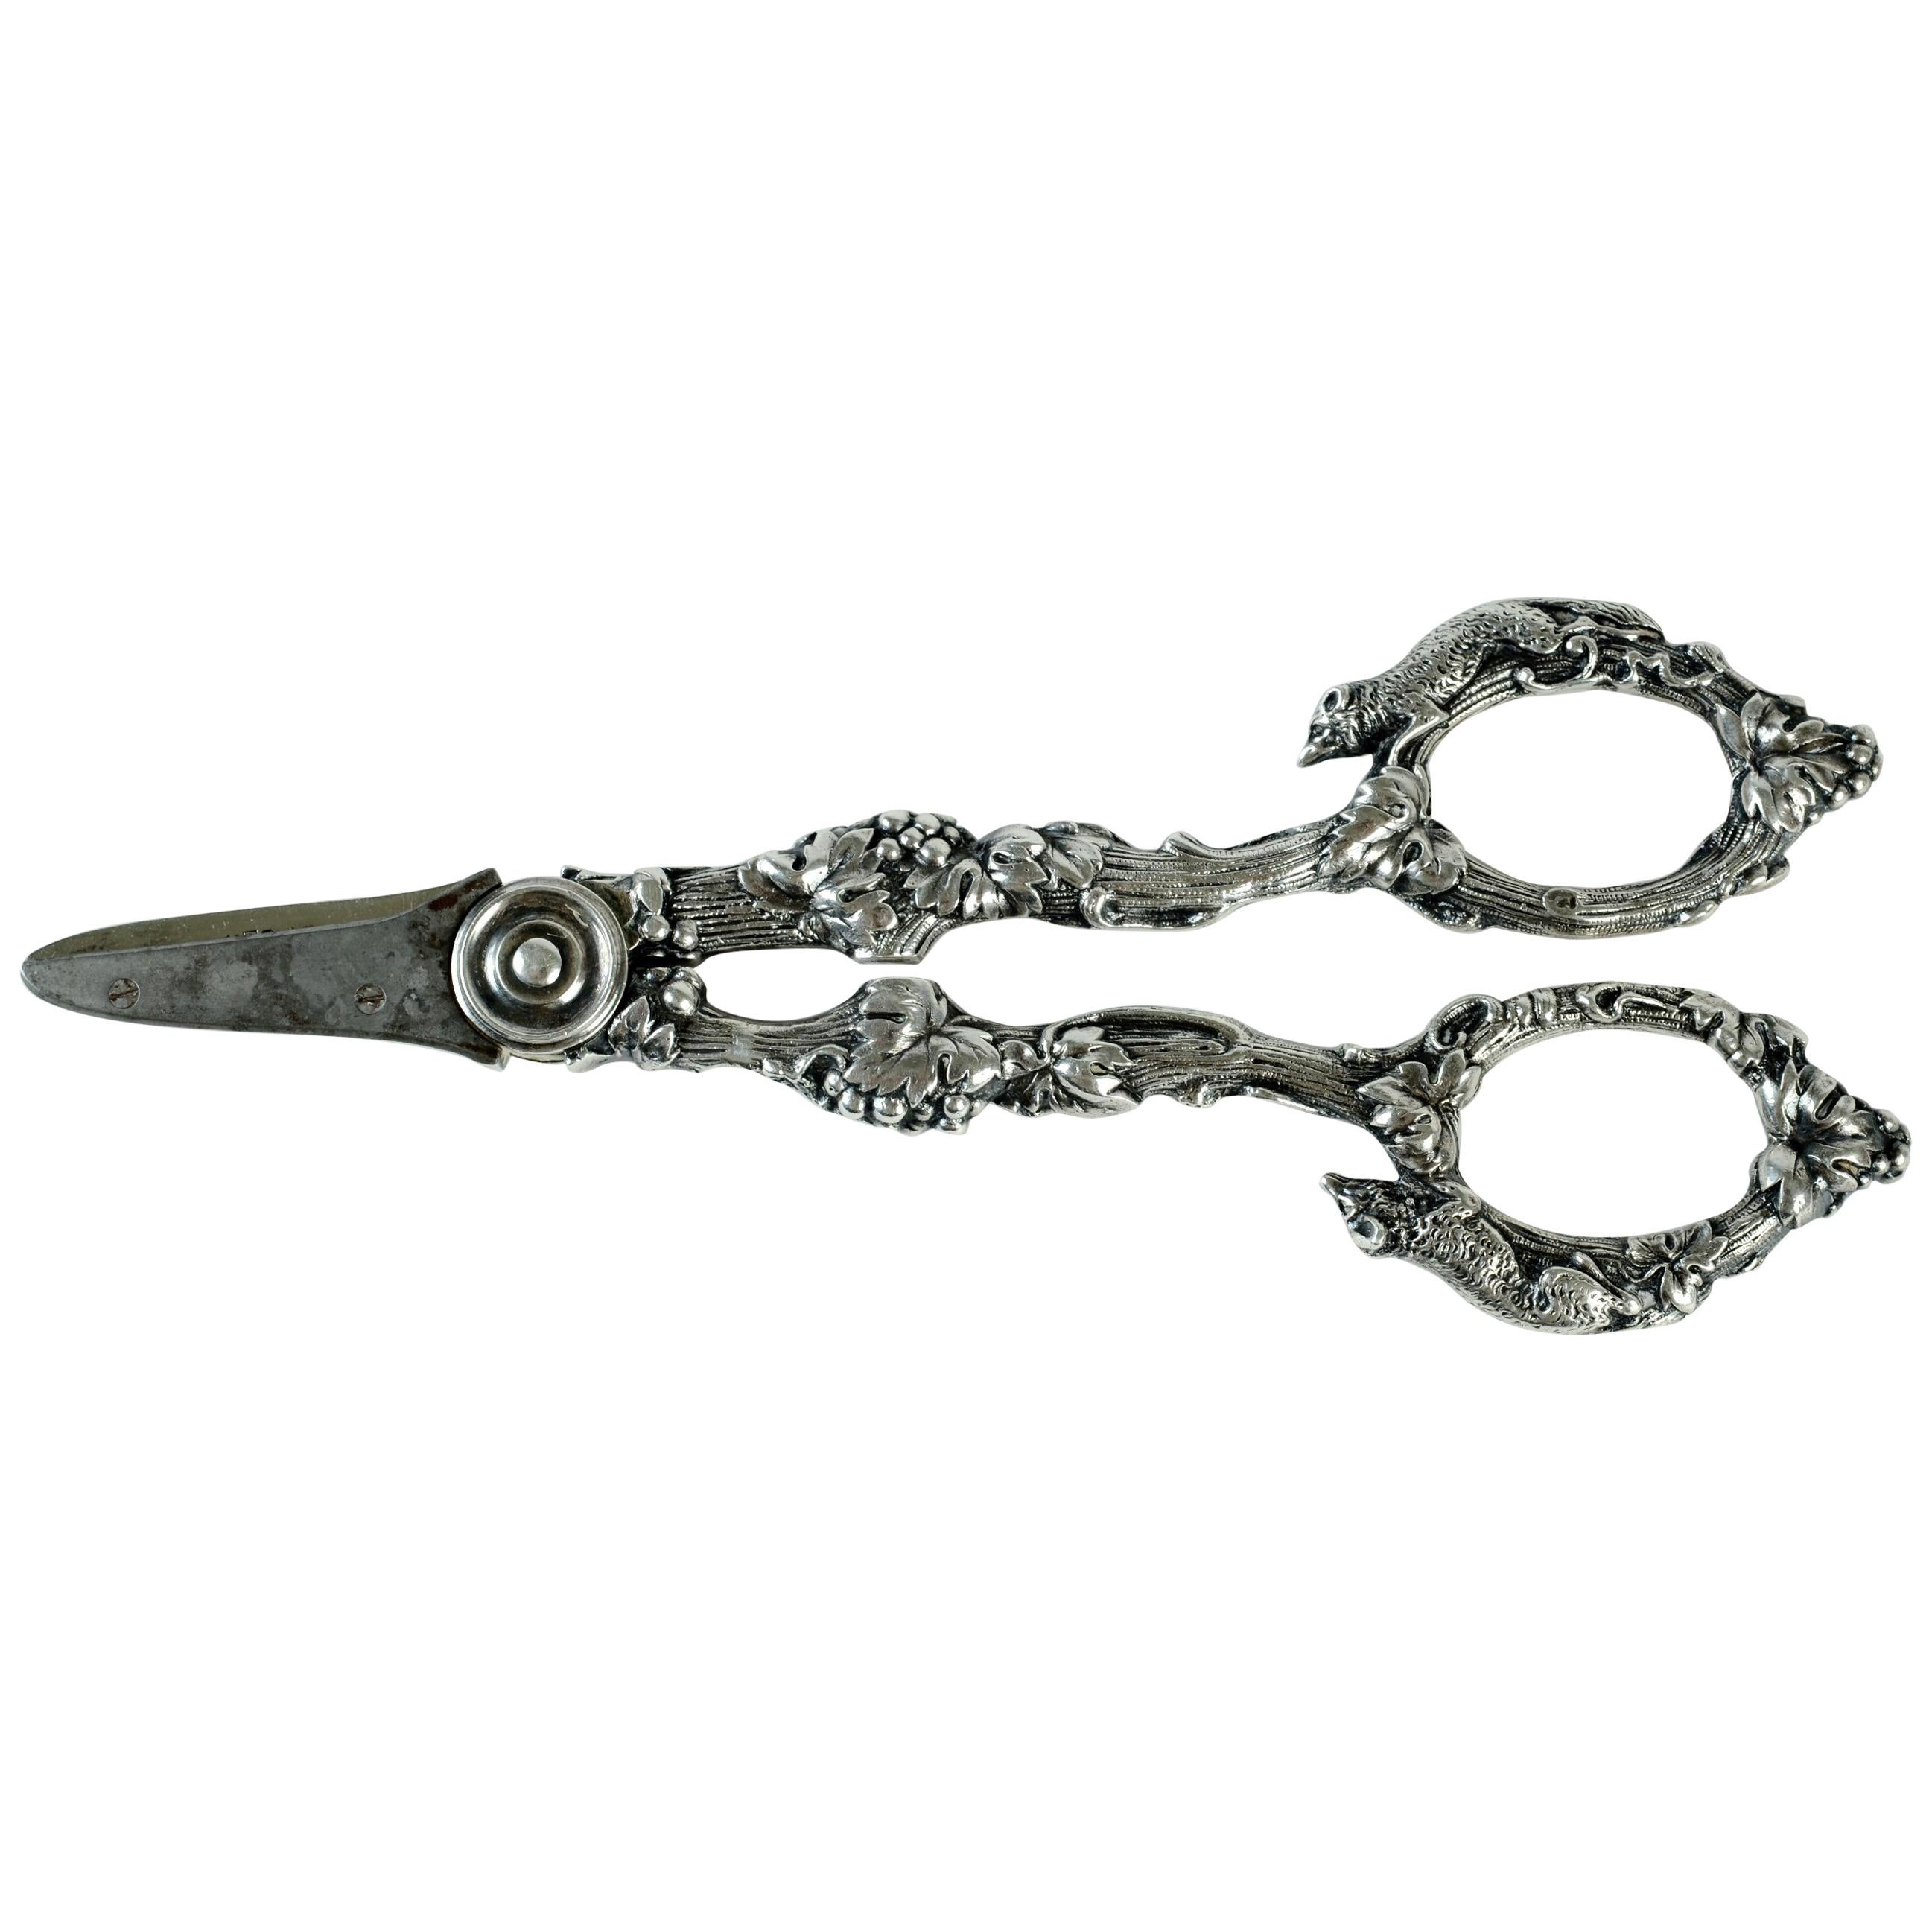 Gorham Sterling Silver Grape Shears, "Fox and Grape" Pattern, Late 19th Century